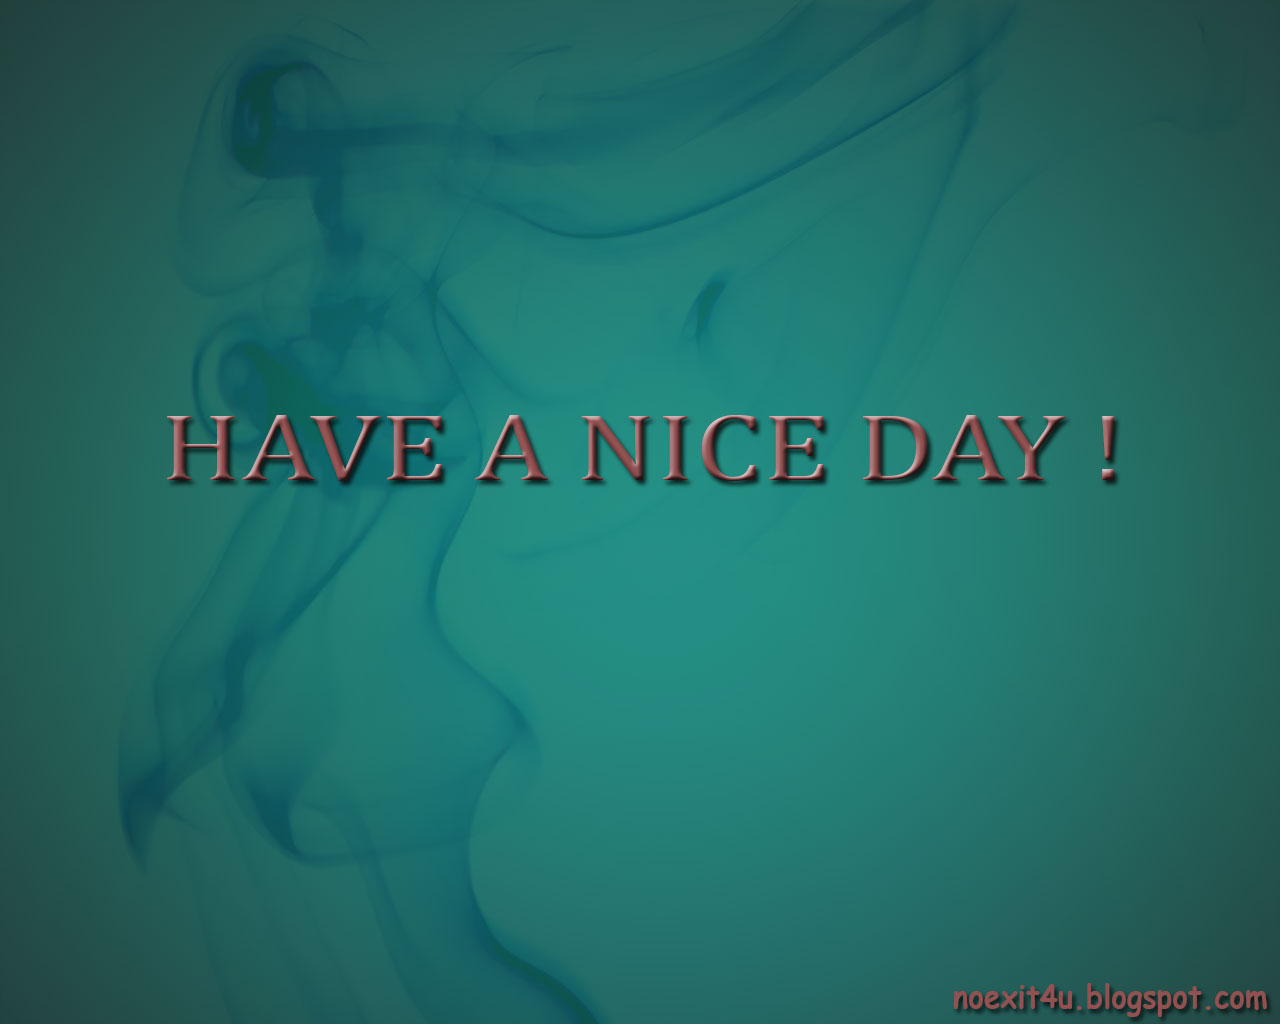 Have A Nice Day Hand Lettering Phrase On Floral Vector Image